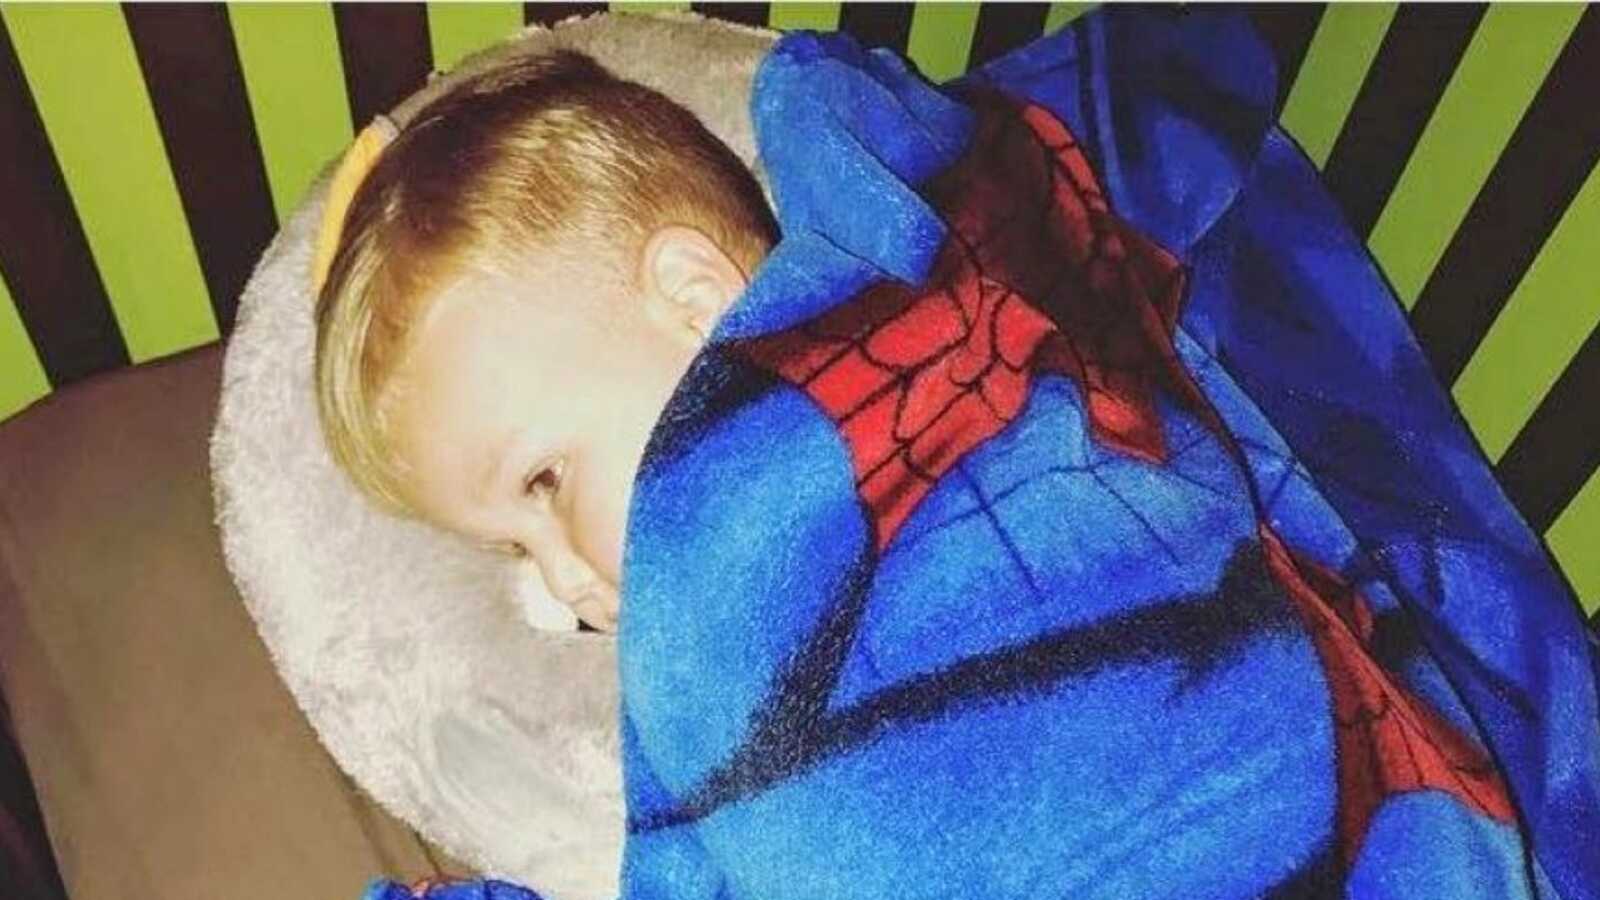 Mom snaps a photo of her son sleeping in his bed with a Spiderman blanket